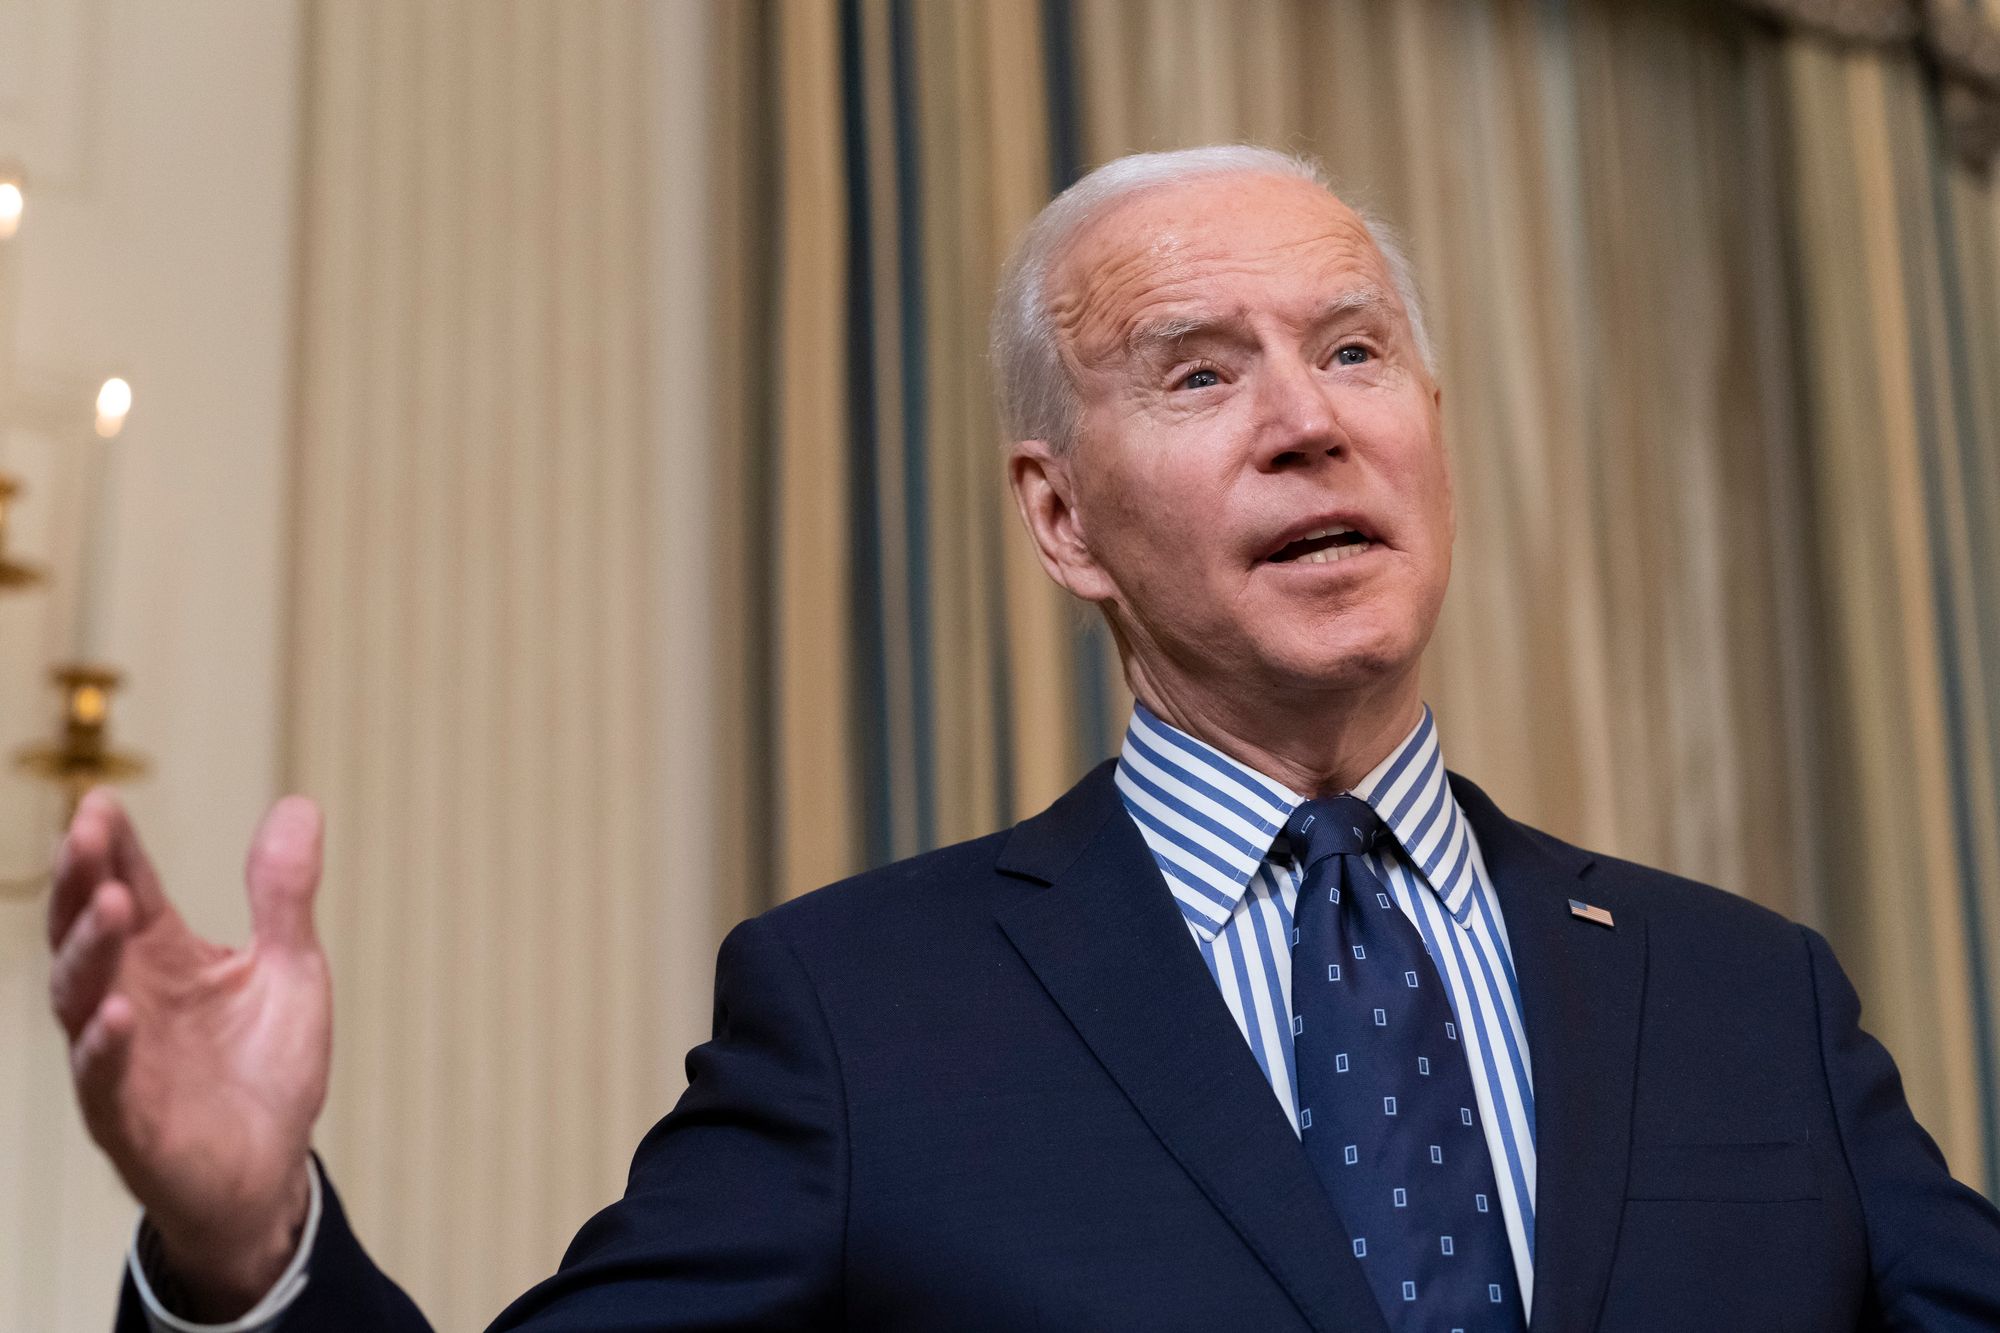 Opinion | With No Votes to Spare, Biden Will get a Win Obama and Clinton Would Have Envied